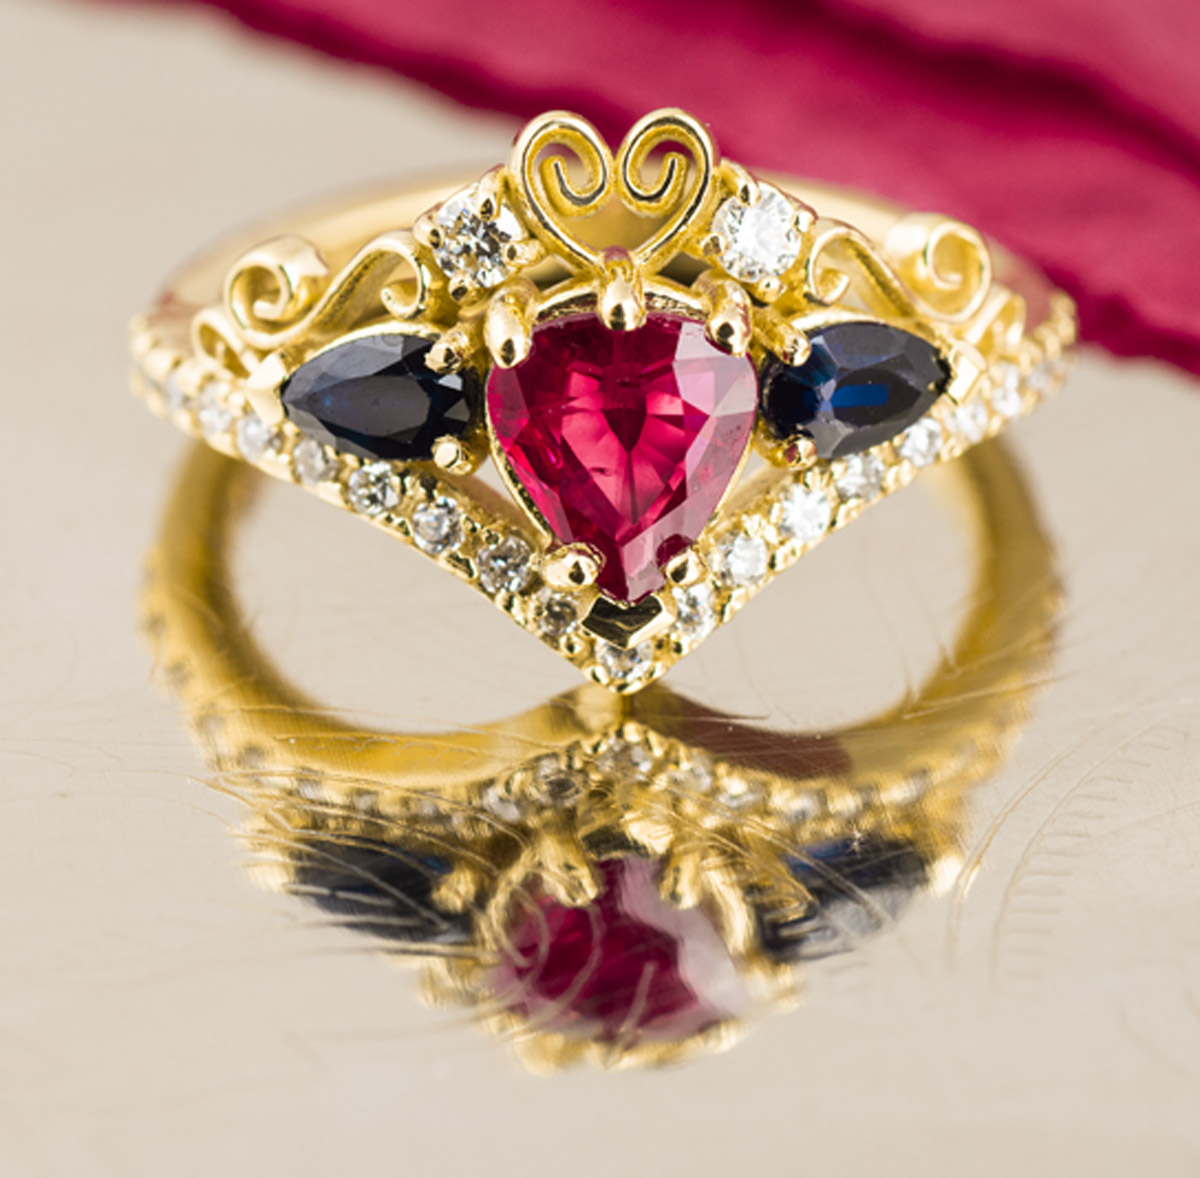 23 Best Ruby Engagement Rings - Top Red Stone Rings for Proposals